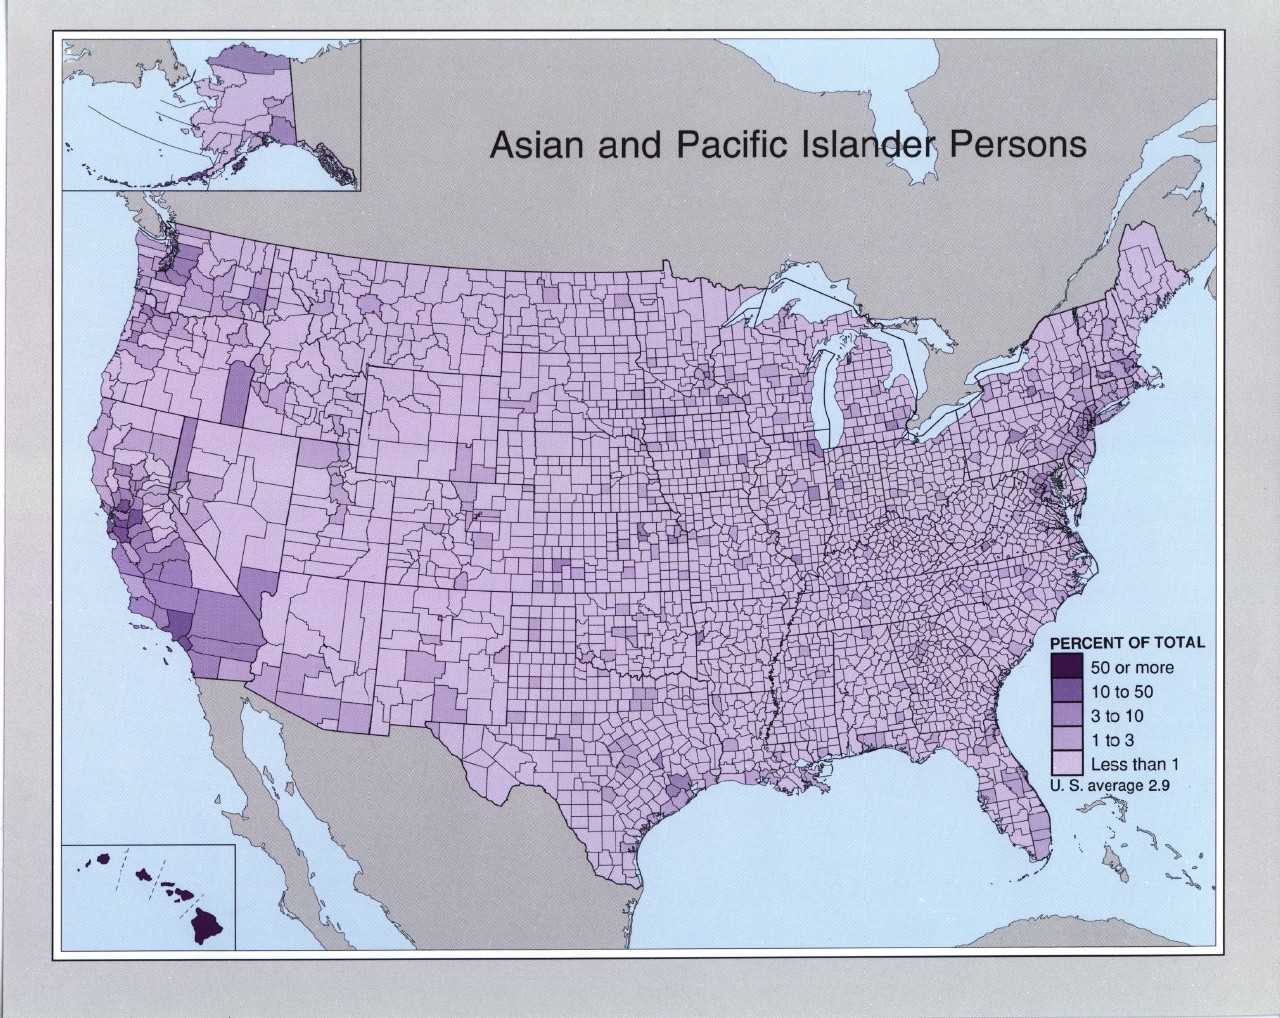 Asian and Pacific Islander Persons